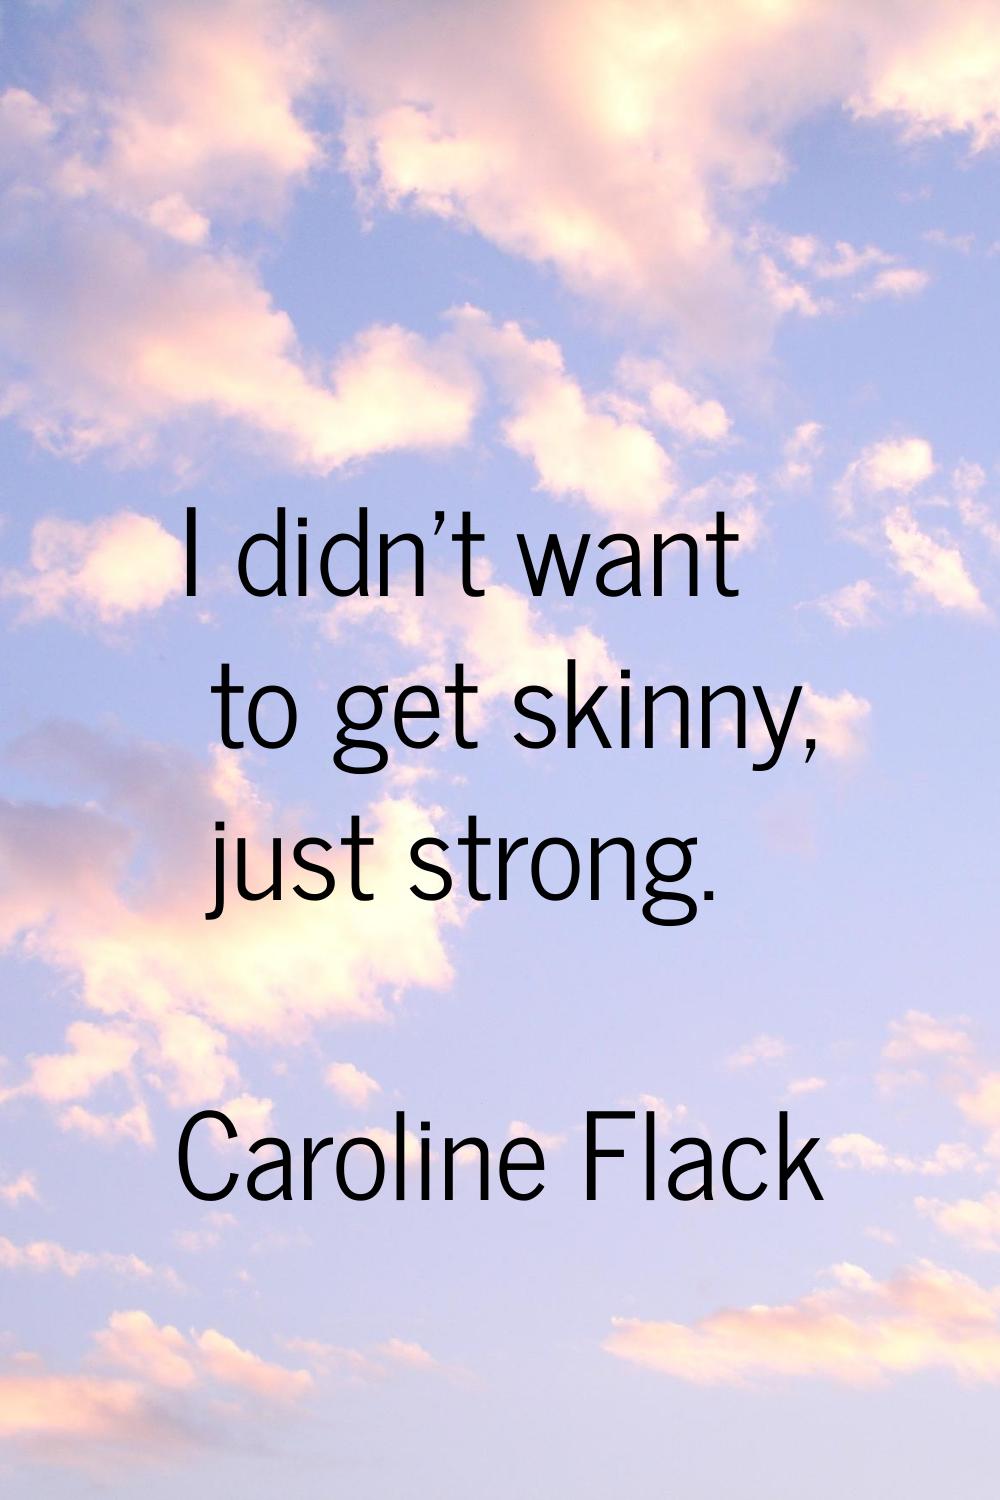 I didn't want to get skinny, just strong.